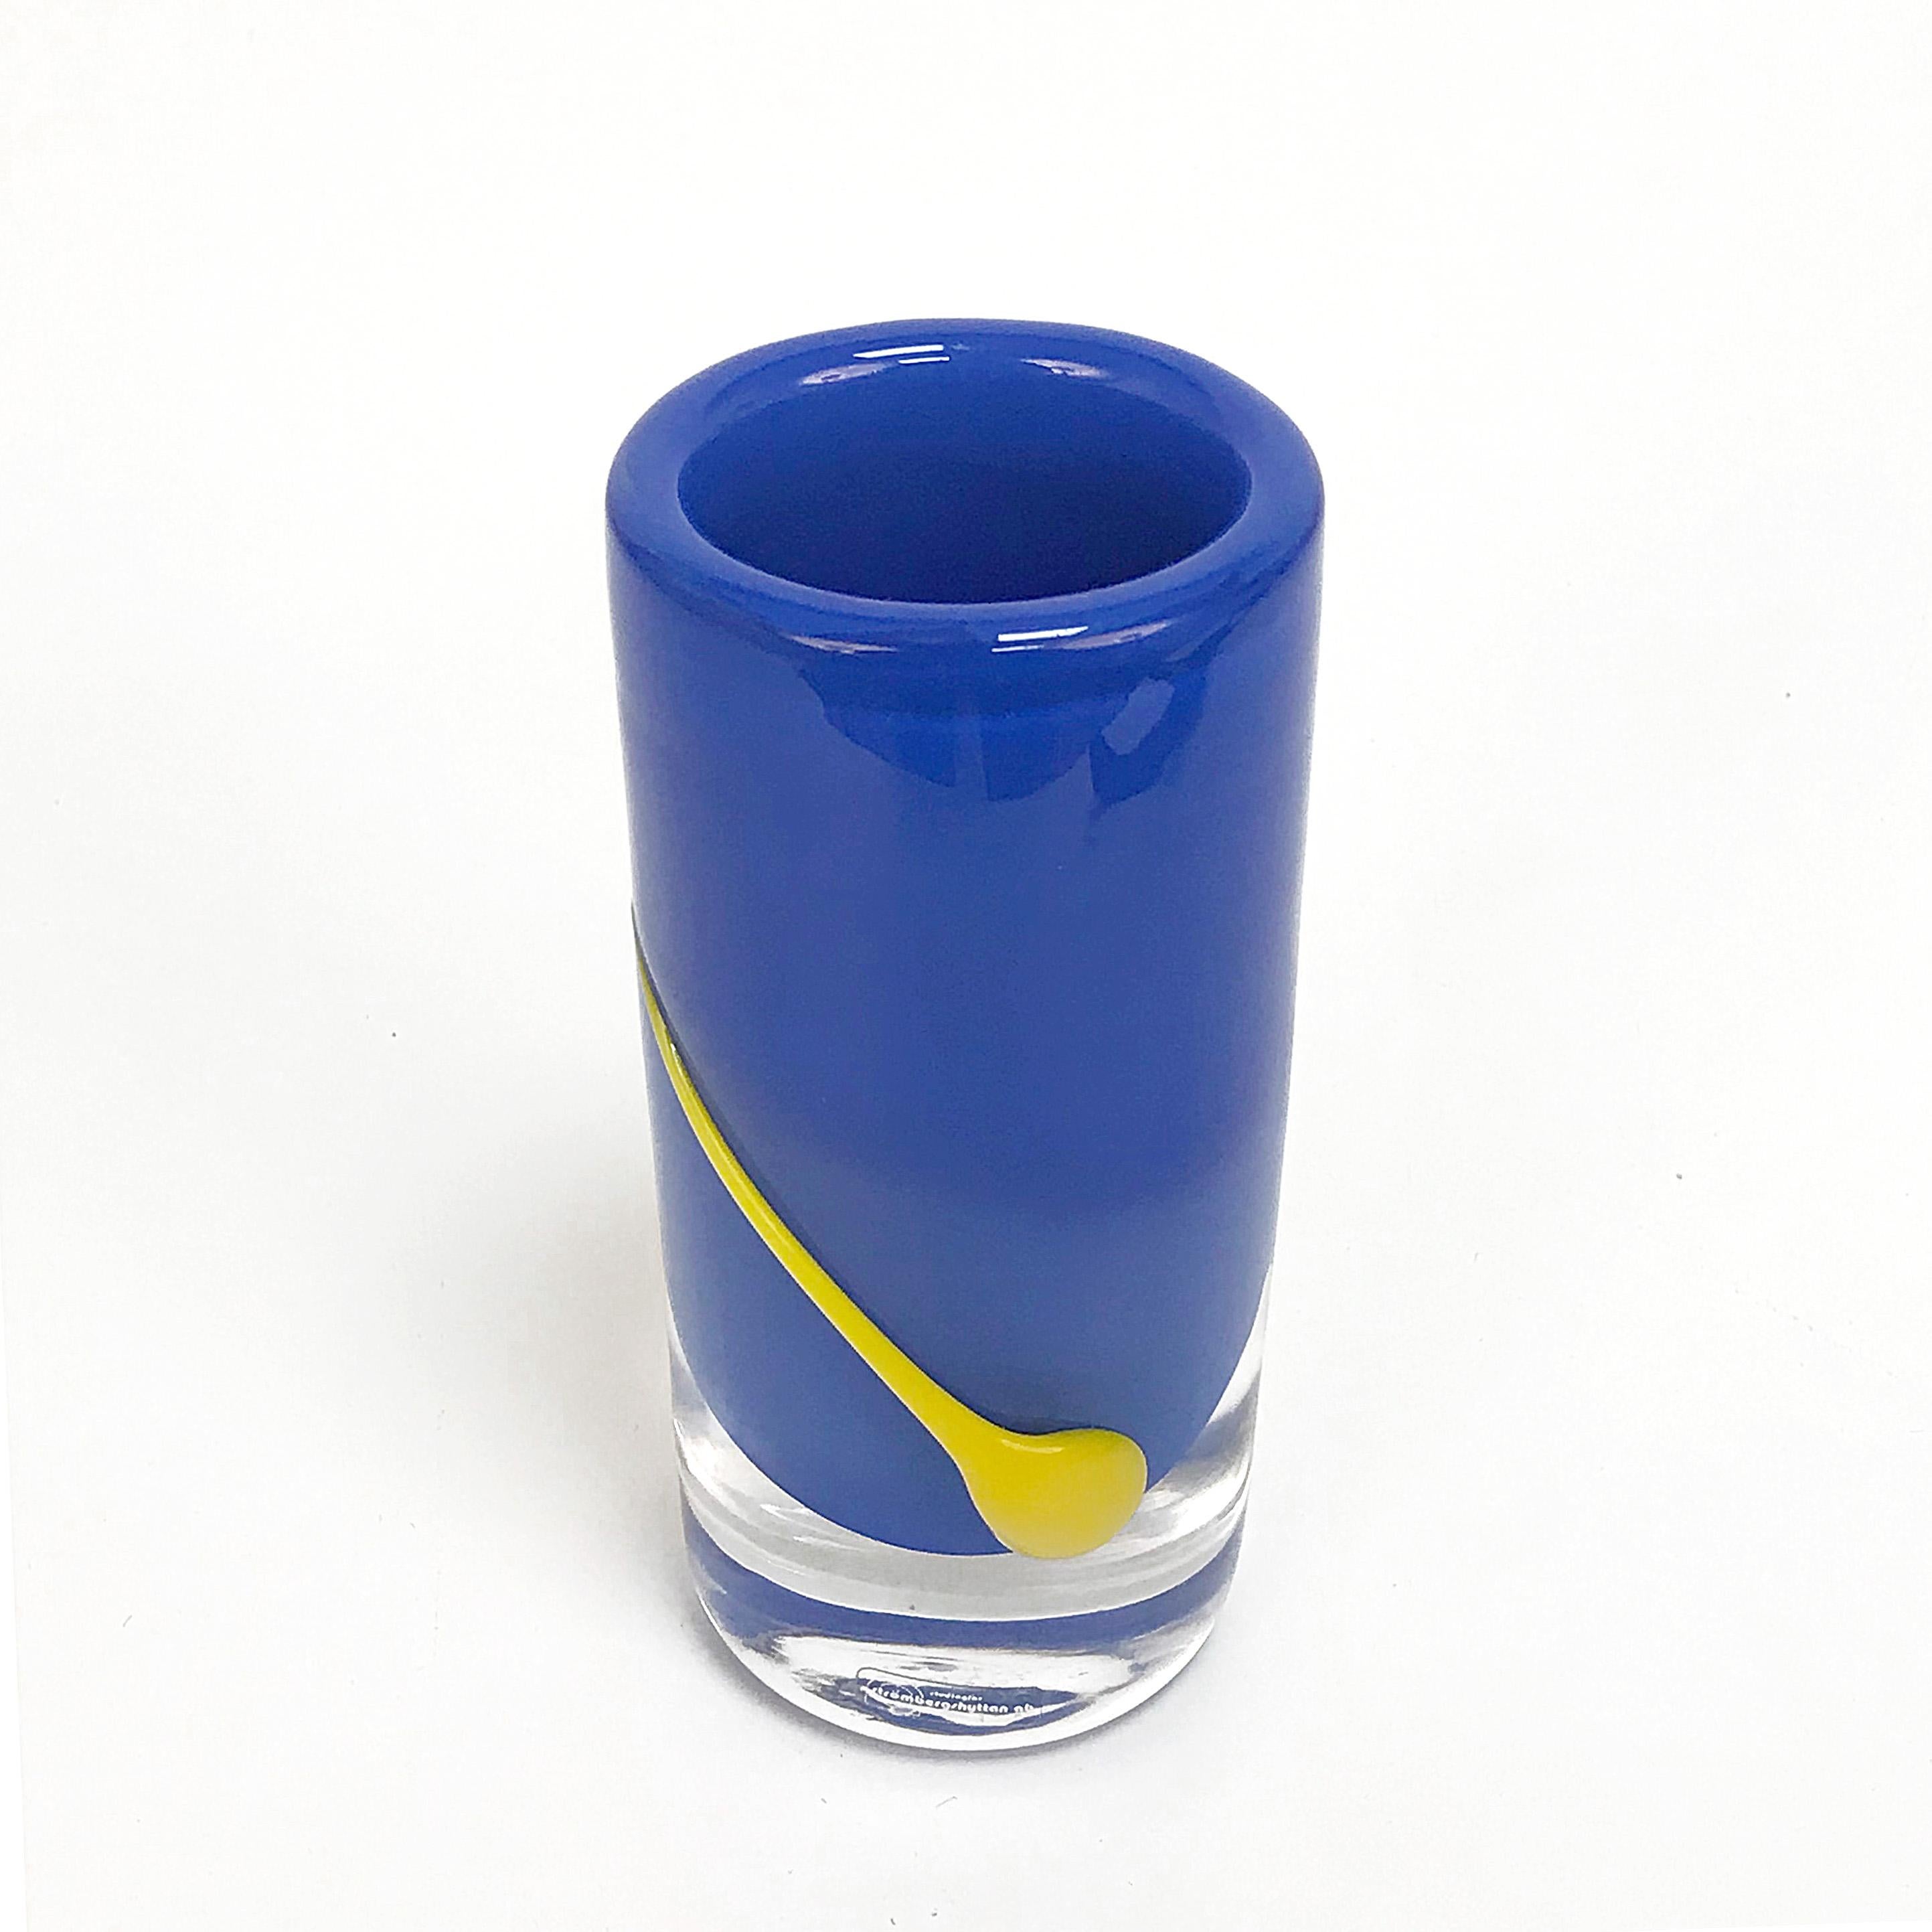 Vase by Stombergs Hyttan, Glass Blue and Yellow, Sweden Crystal Strombergshyttan In Good Condition For Sale In Roma, IT